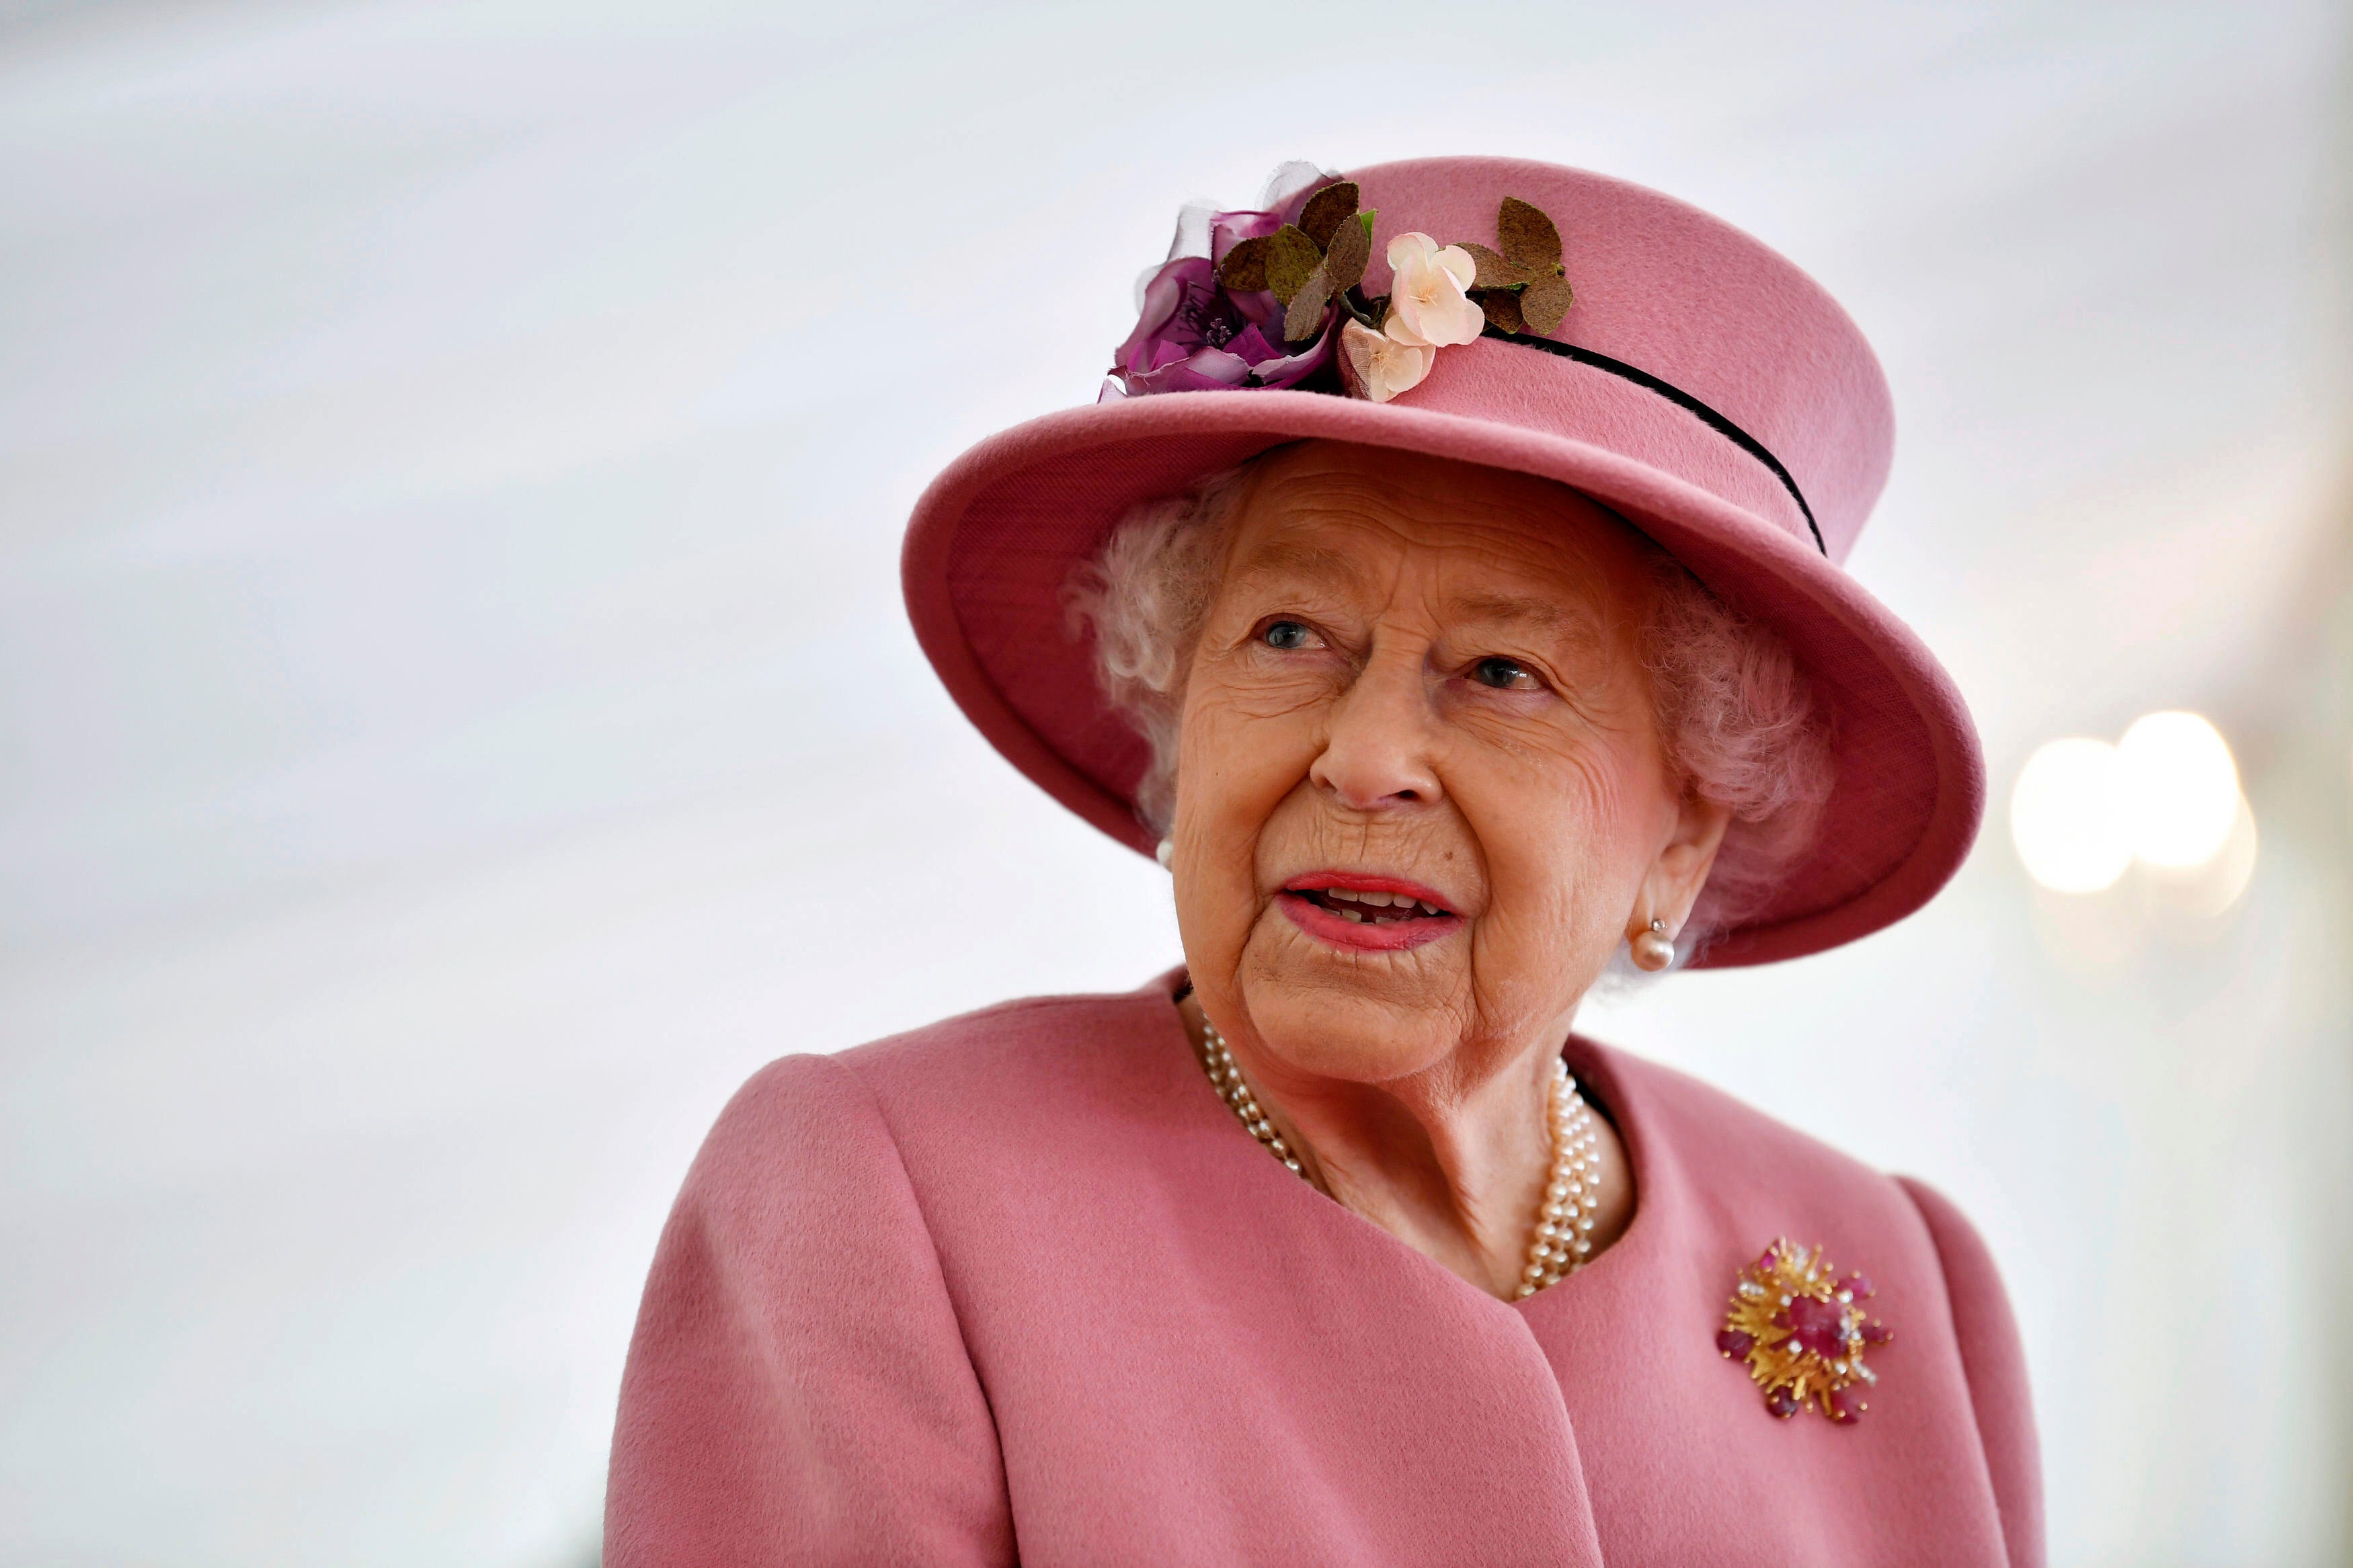 I reported on Queen Elizabeth II and the royal family for more than 30 years